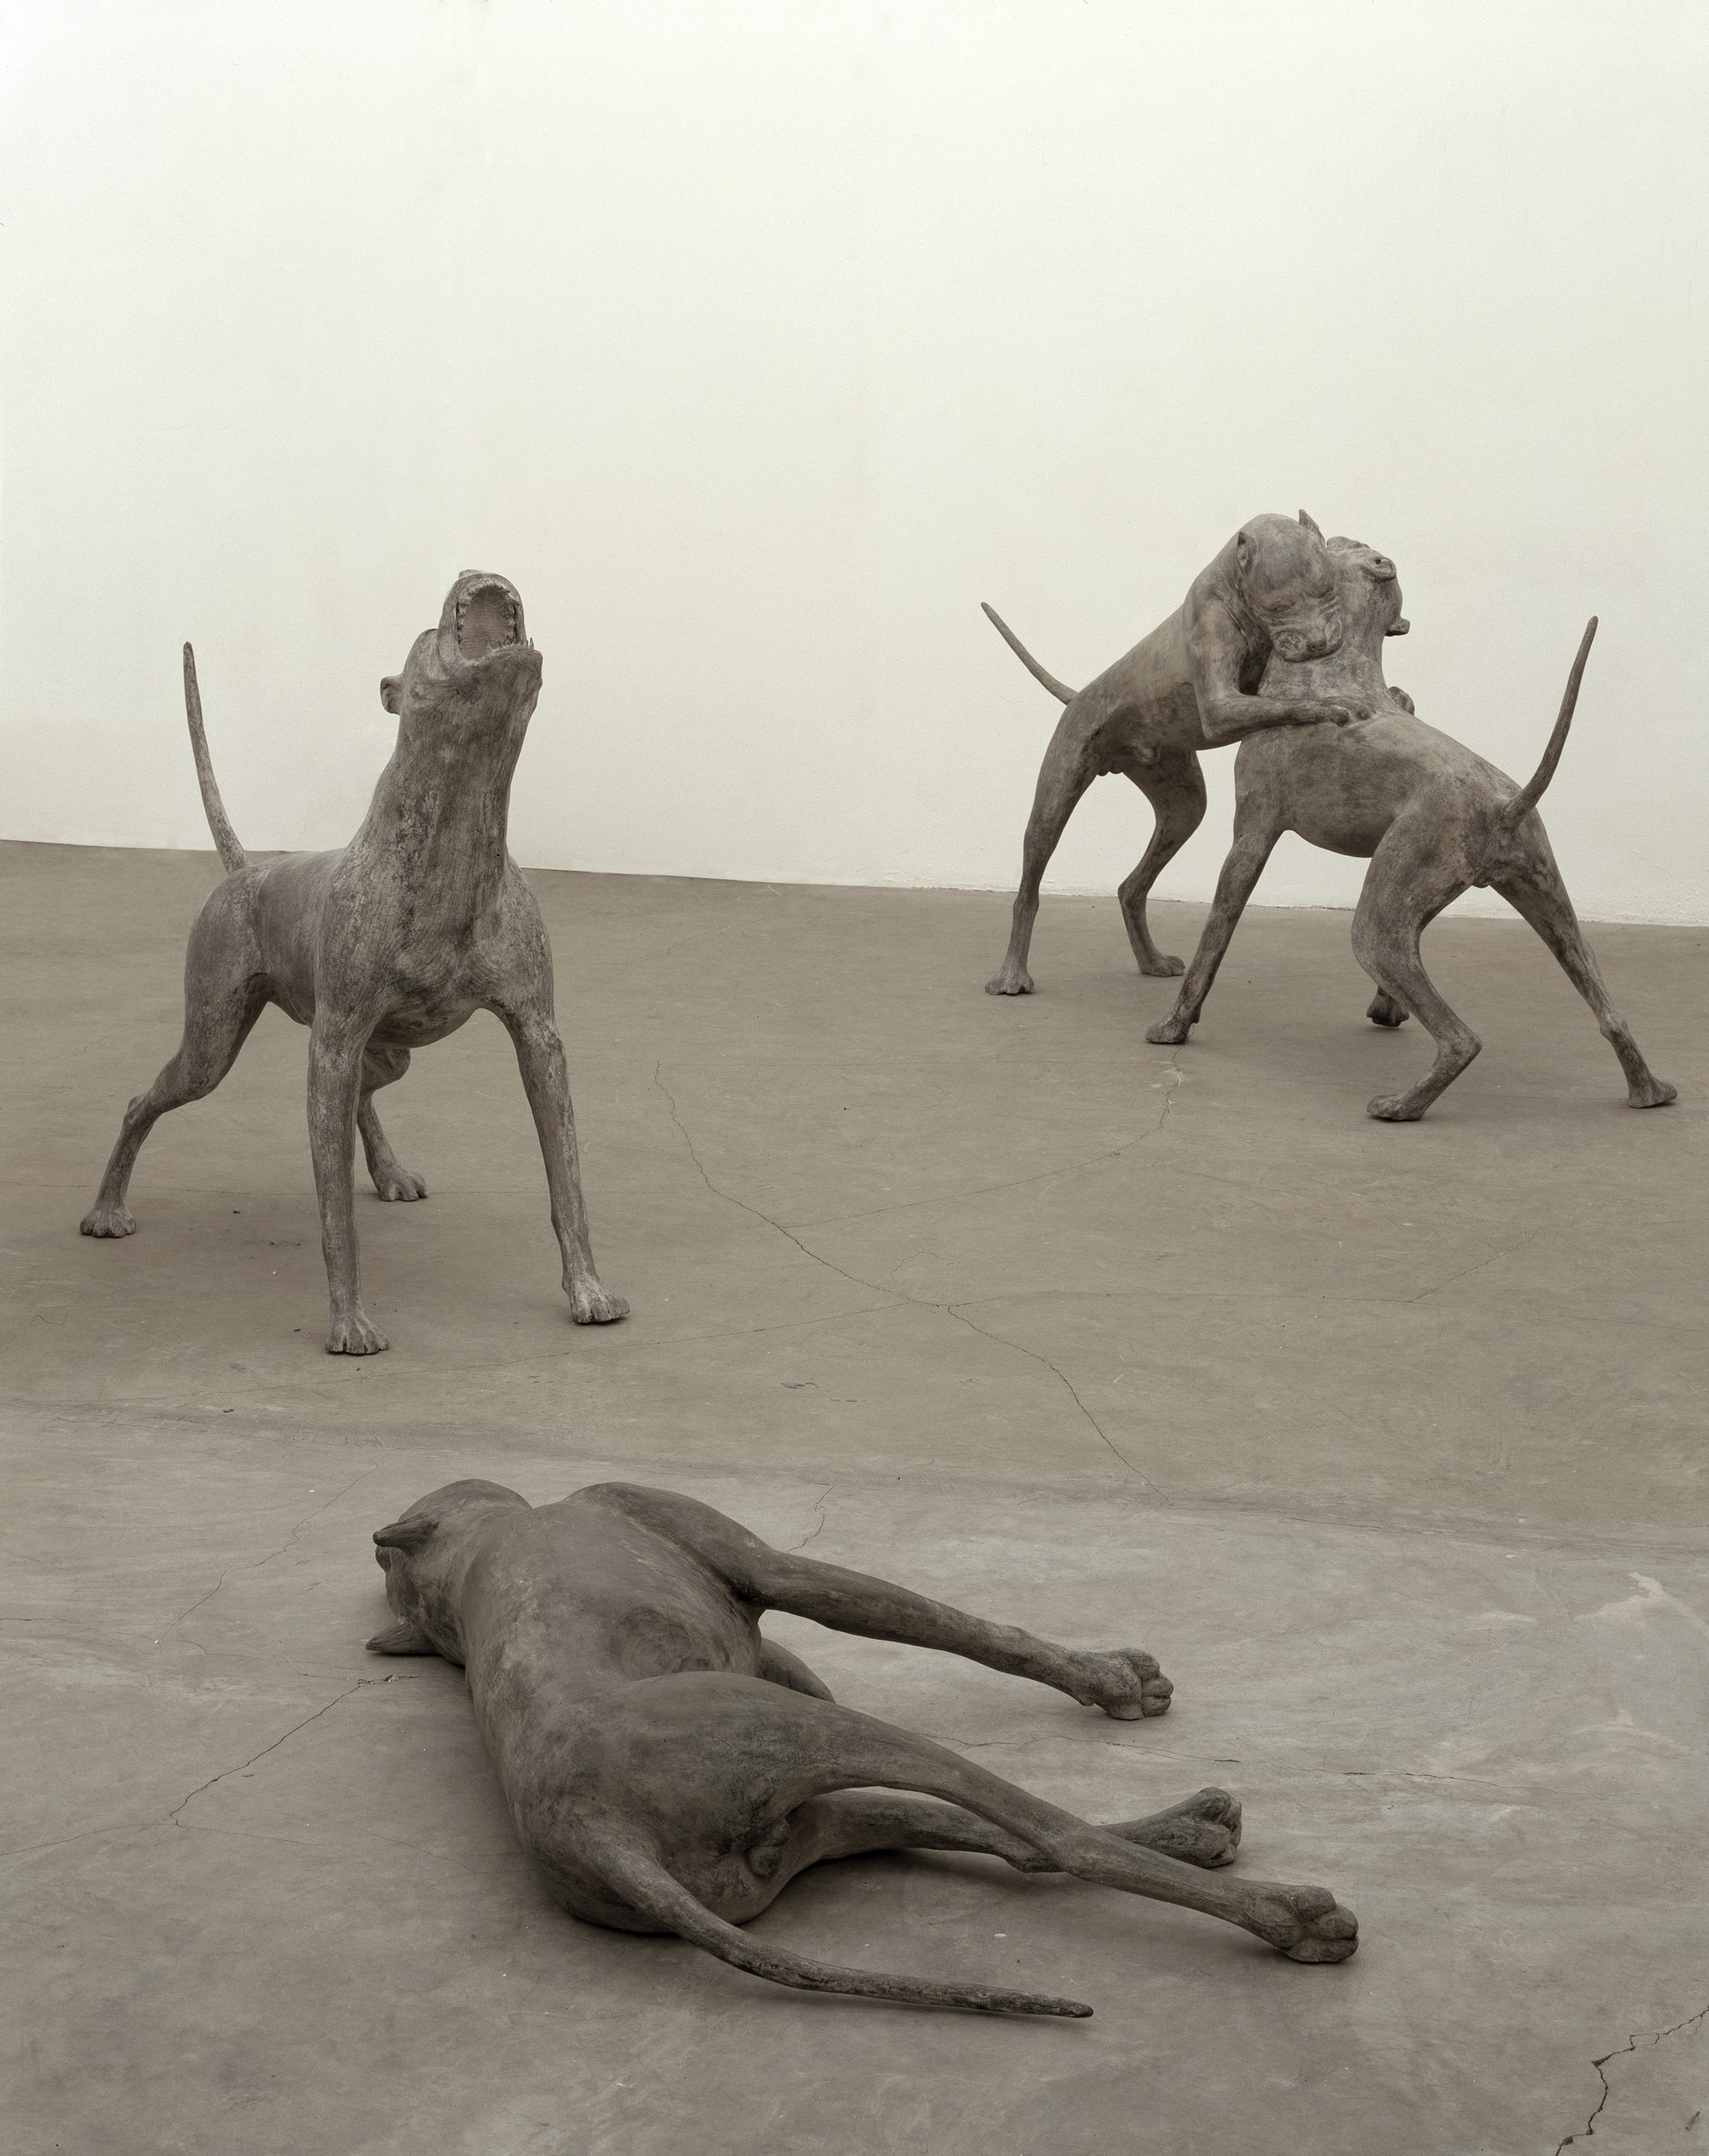 Liliana Moro, Underdog, 5 chiselled and patinated dogs cast in bronze, dimensions variable, 2005. Installation view, Liliana Moro, Underdog, Emi Fontana Gallery, Milan, 2005